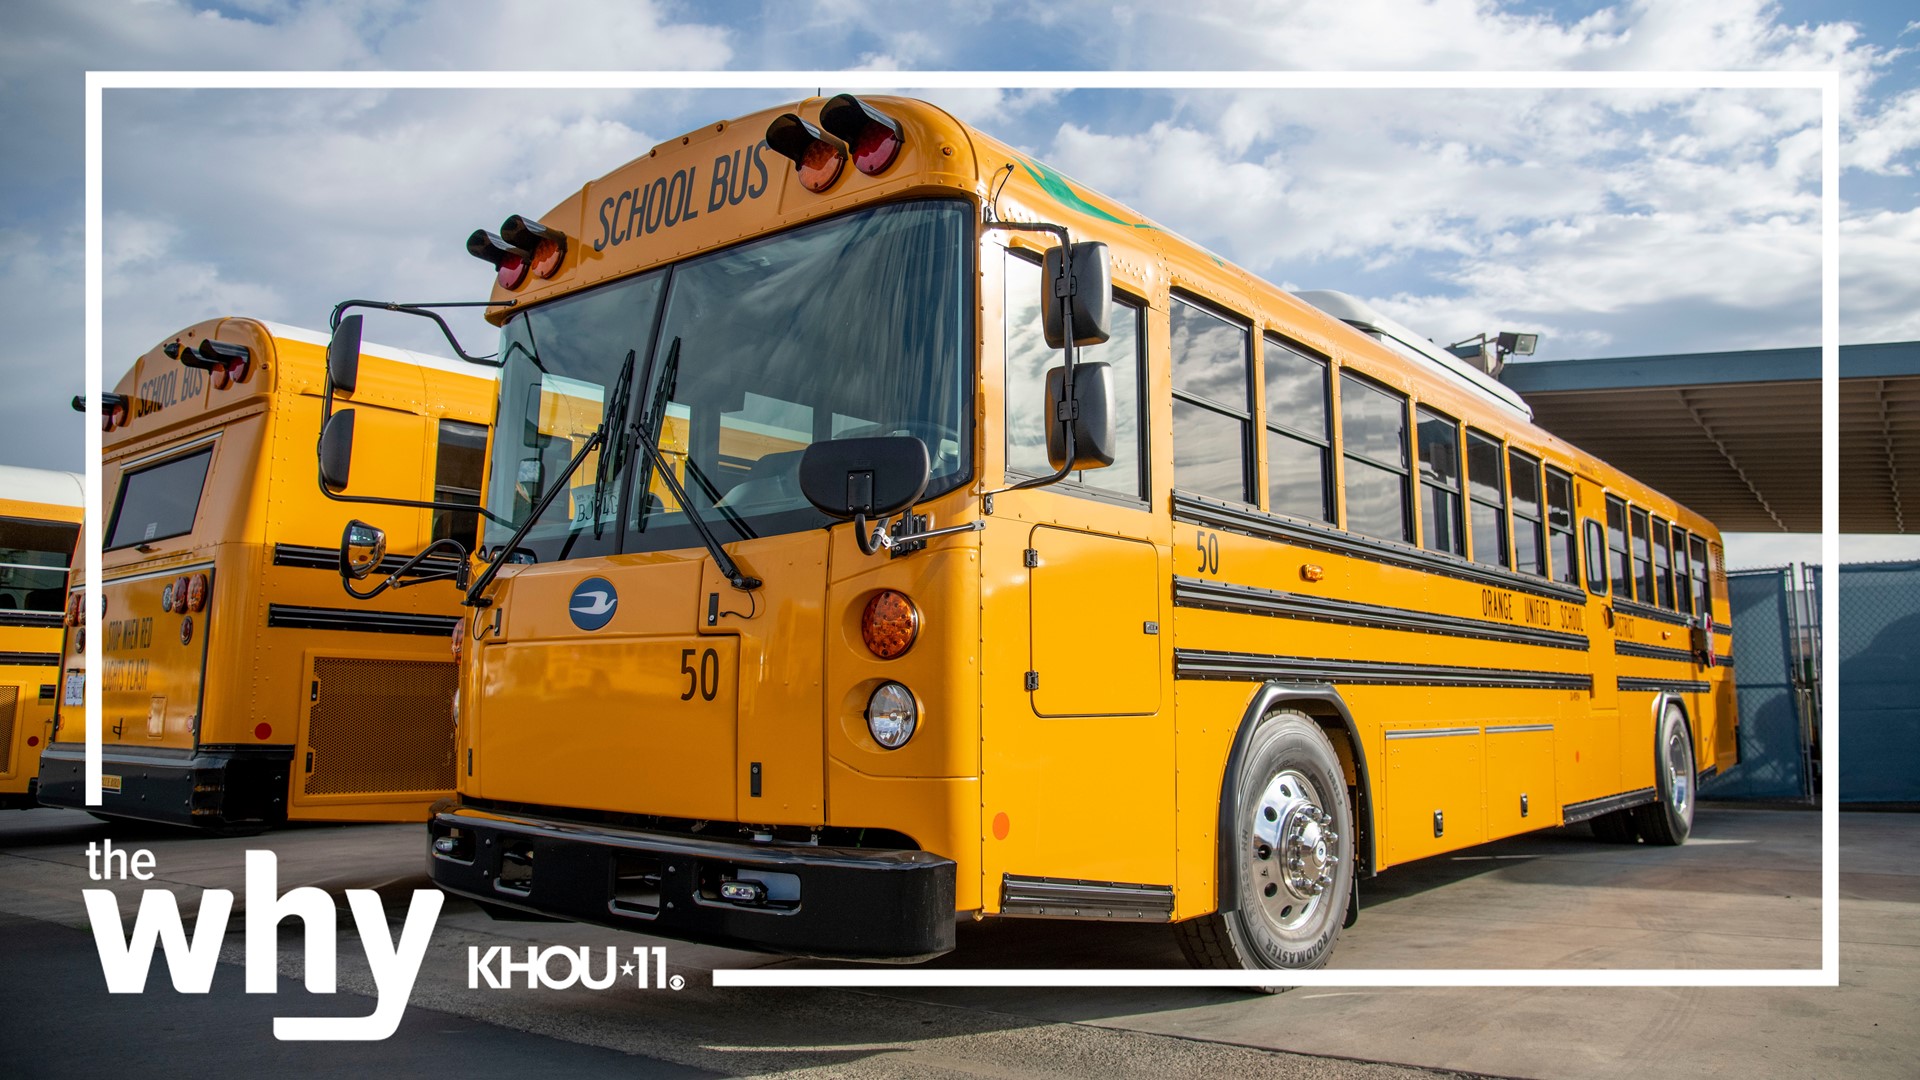 School districts across the country are swapping out those old yellow school buses belching diesel fumes for electric buses.